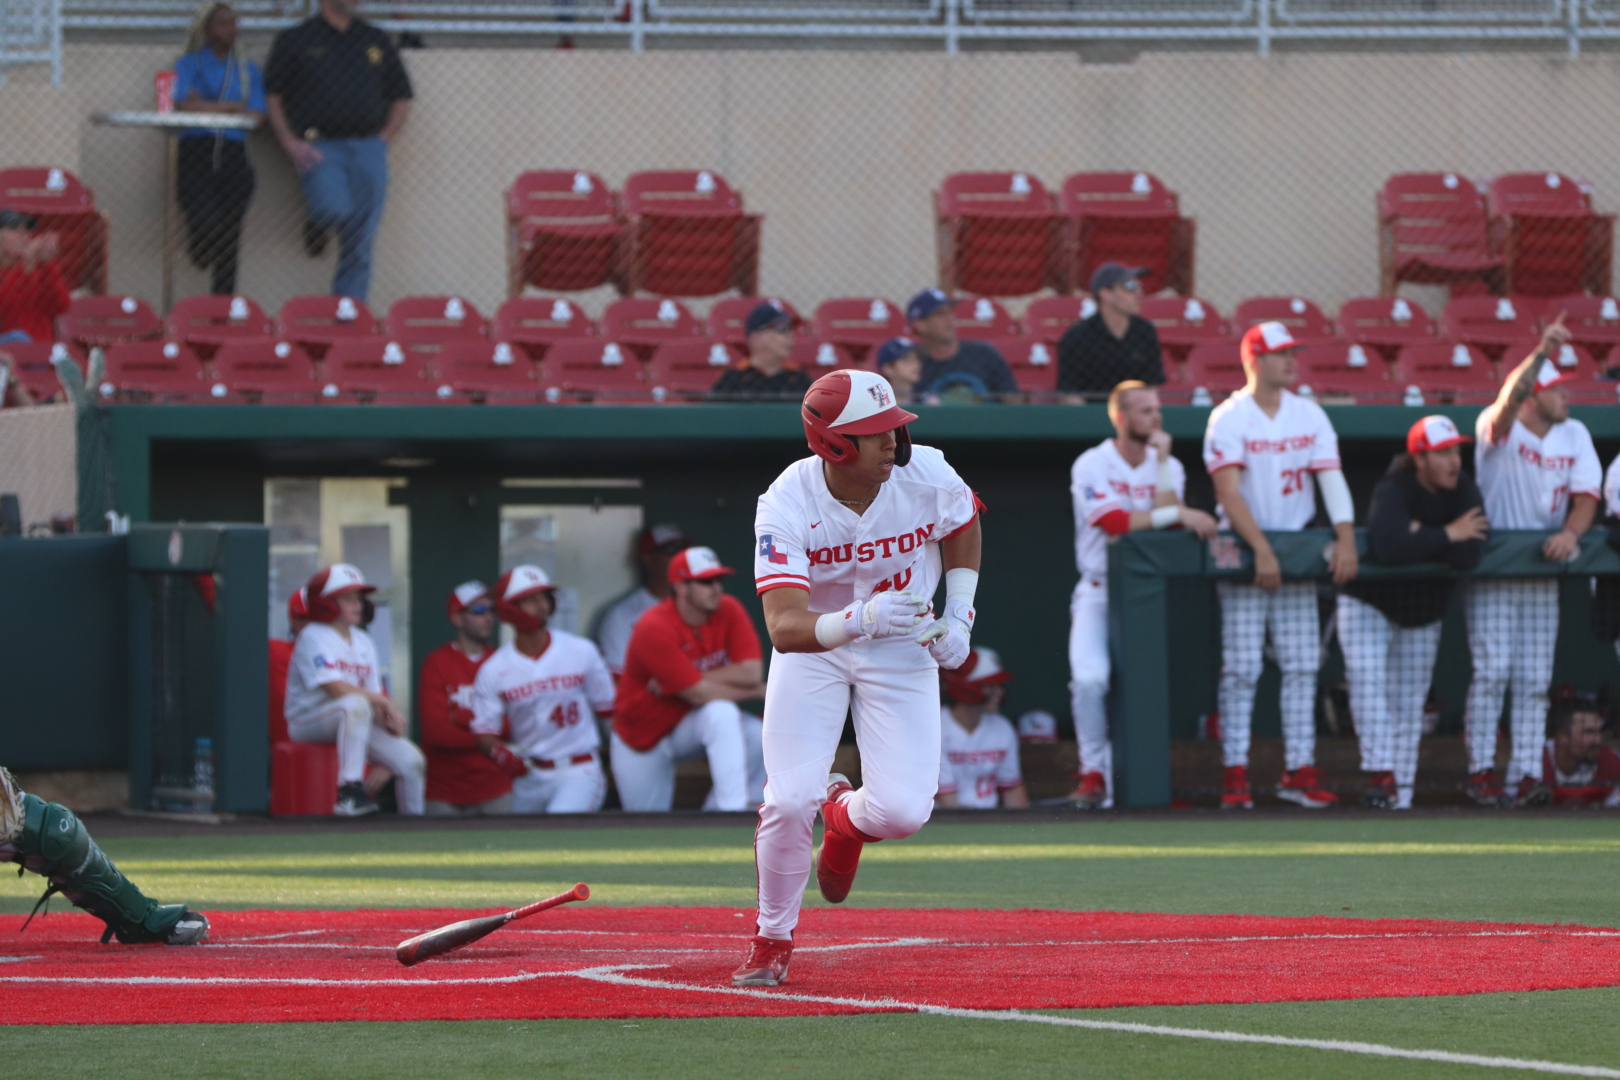 Ryan Hernandez hit home runs No. 7 and 8 on the year over the weekend in UH baseball's series victory over Wichita State. | James Mueller/The Cougar